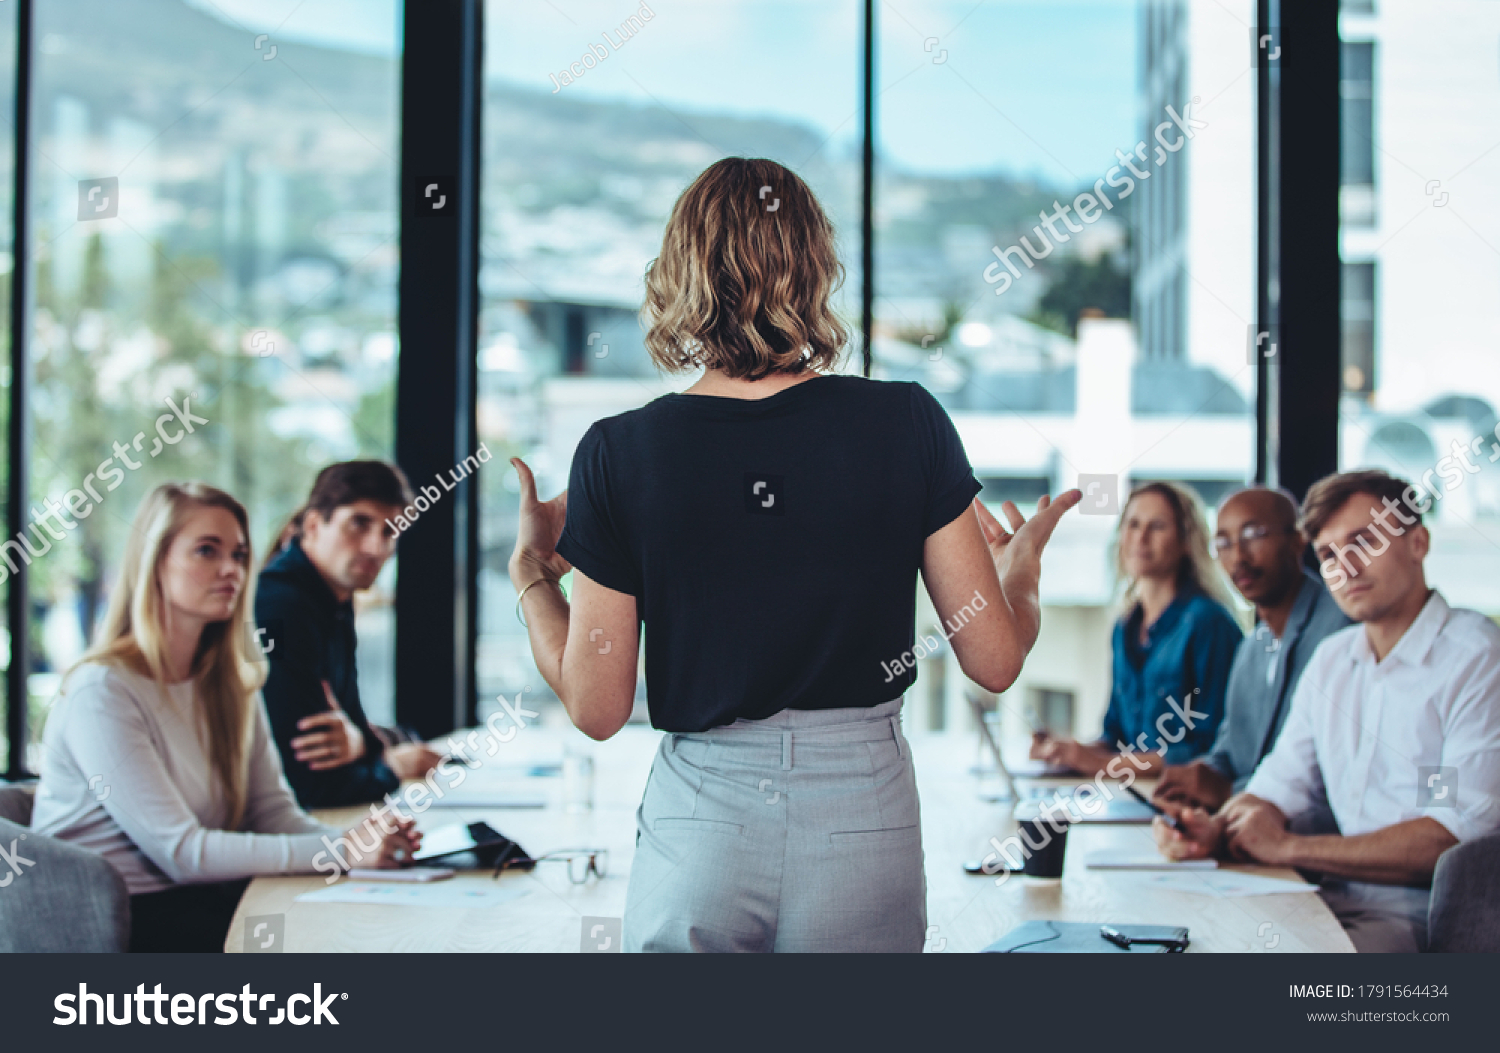 Rear view of a woman explaining new strategies to coworkers during conference meeting in office. Businesspeople meeting in office board room for new project discussion. #1791564434